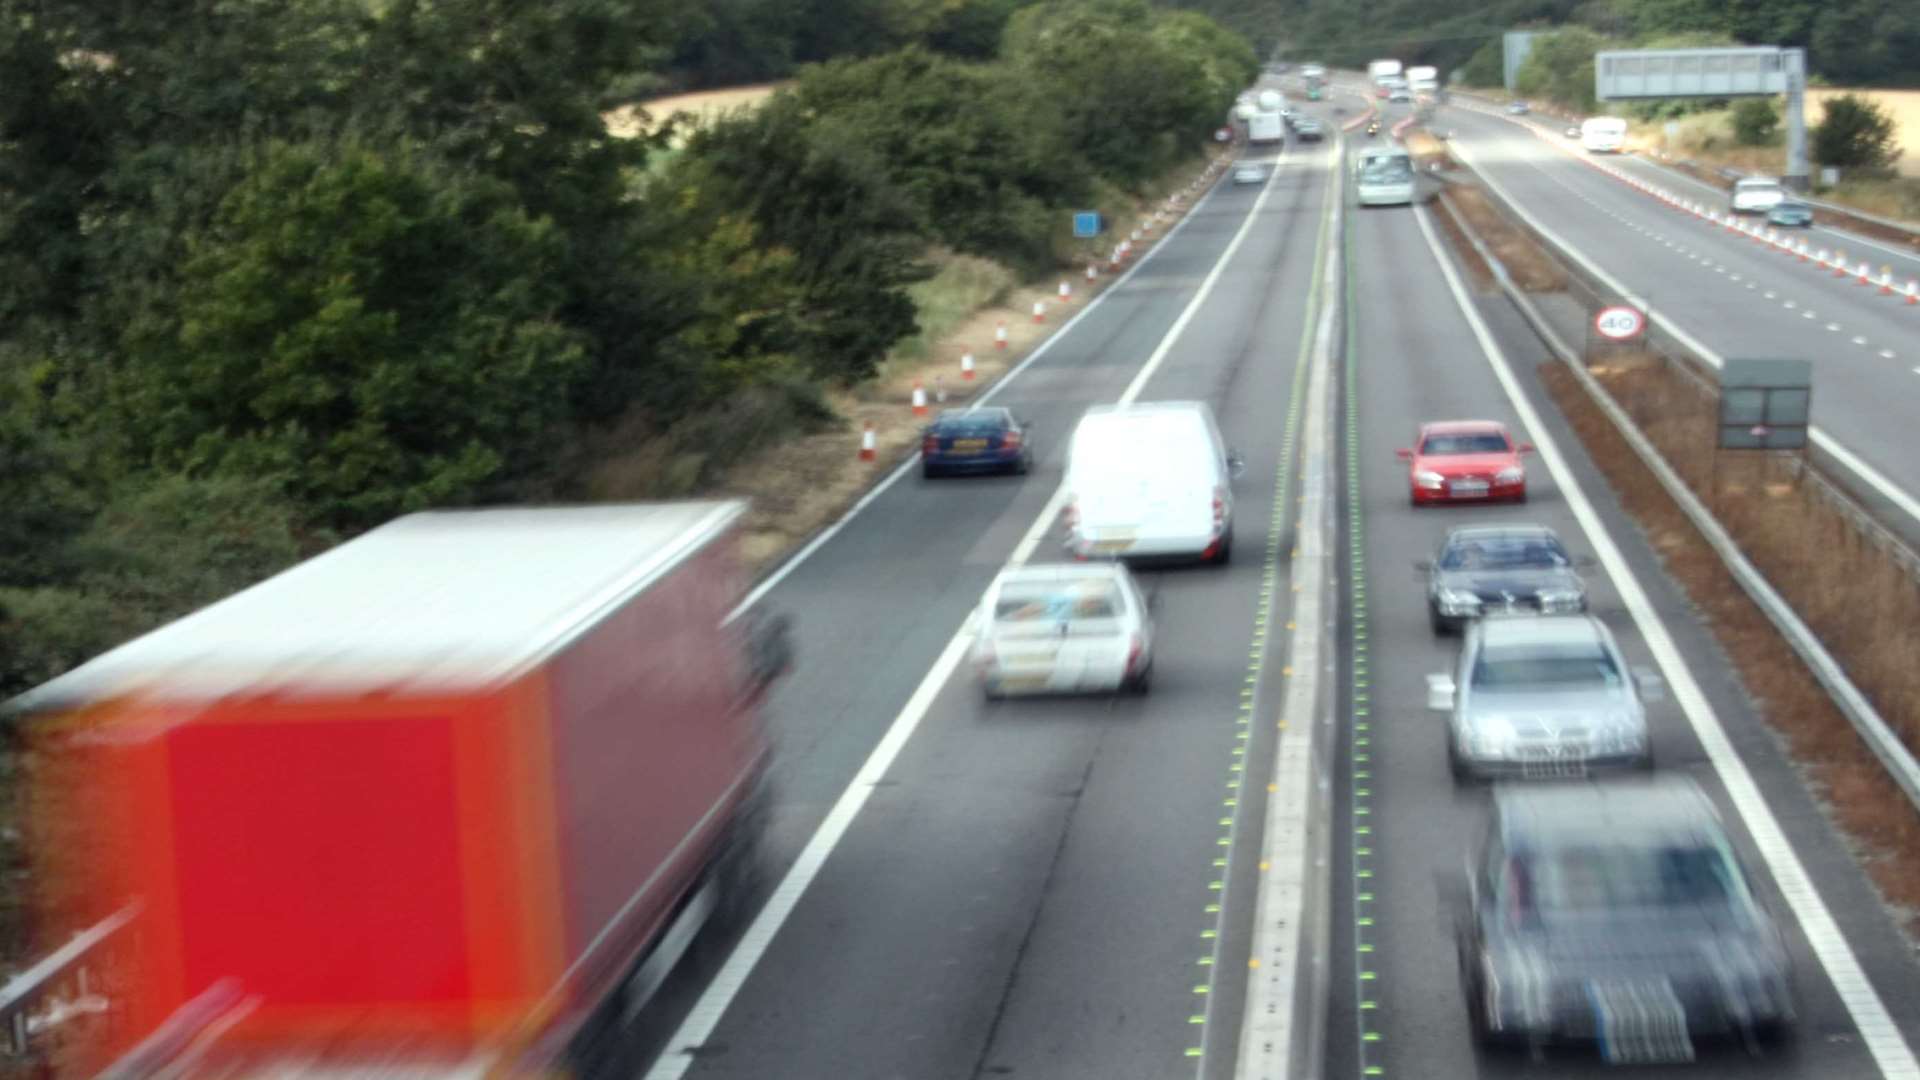 Improvements are planned to the Stockbury Viaduct on the M2